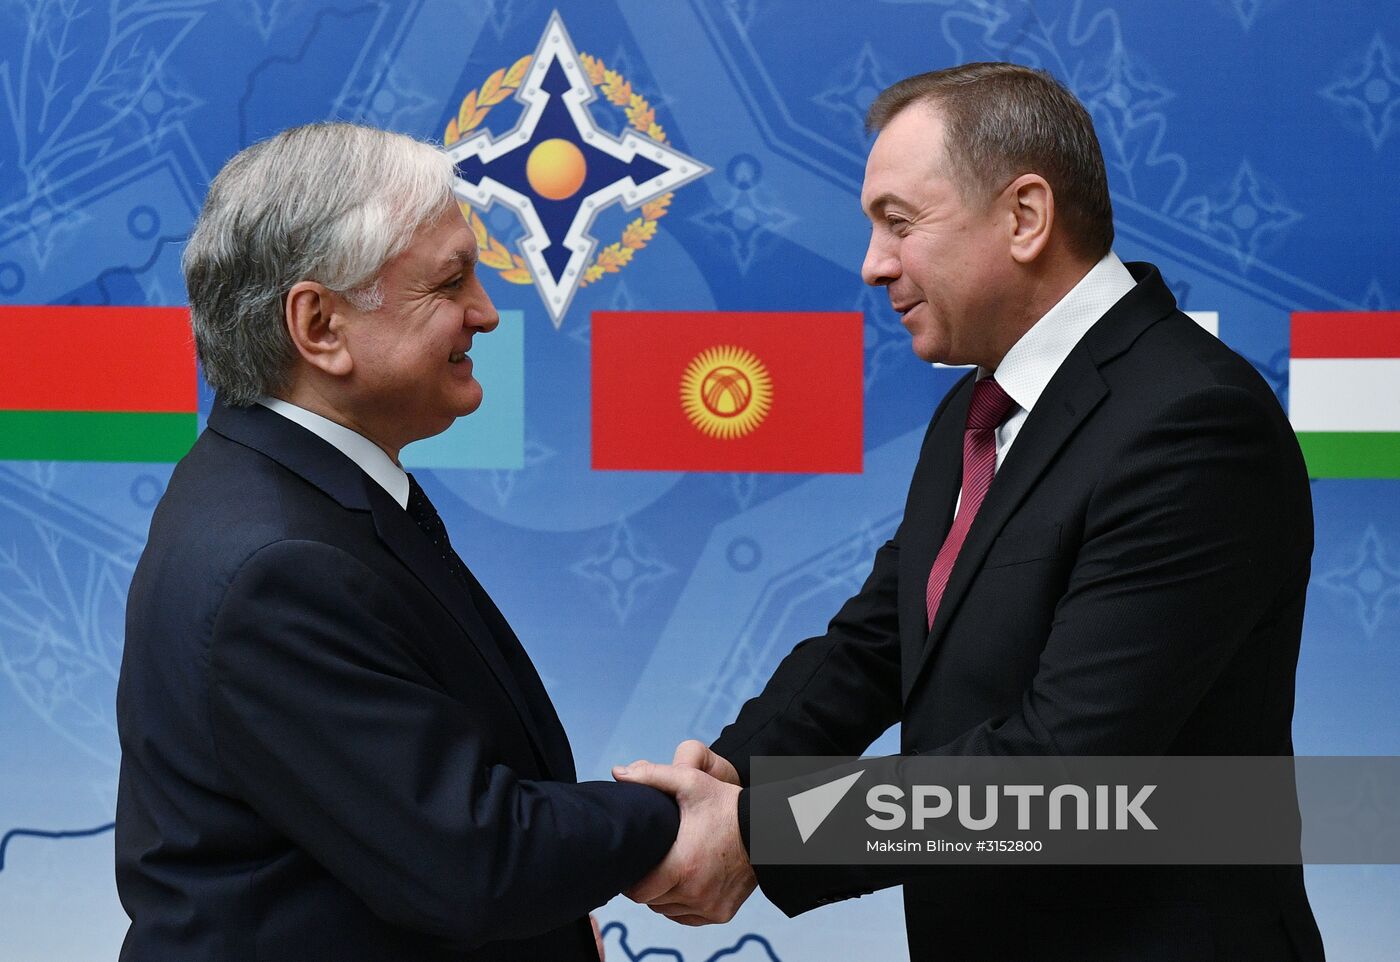 Meeting of CSTO Council of Foreign Ministers in Minsk